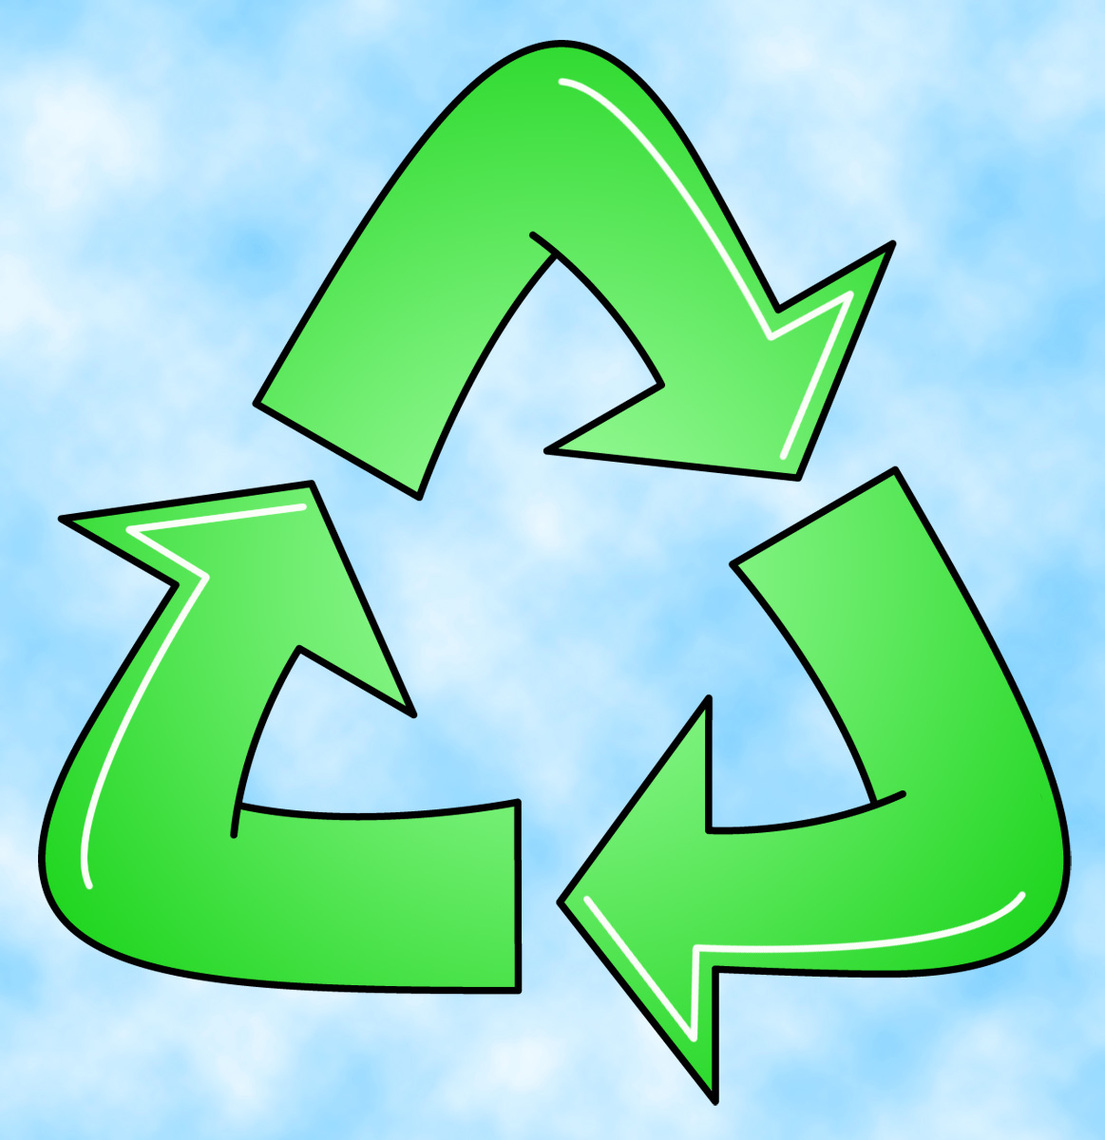 recycle-clipart-recycle-graphics-recycle-bin-recycling-guide-how-to